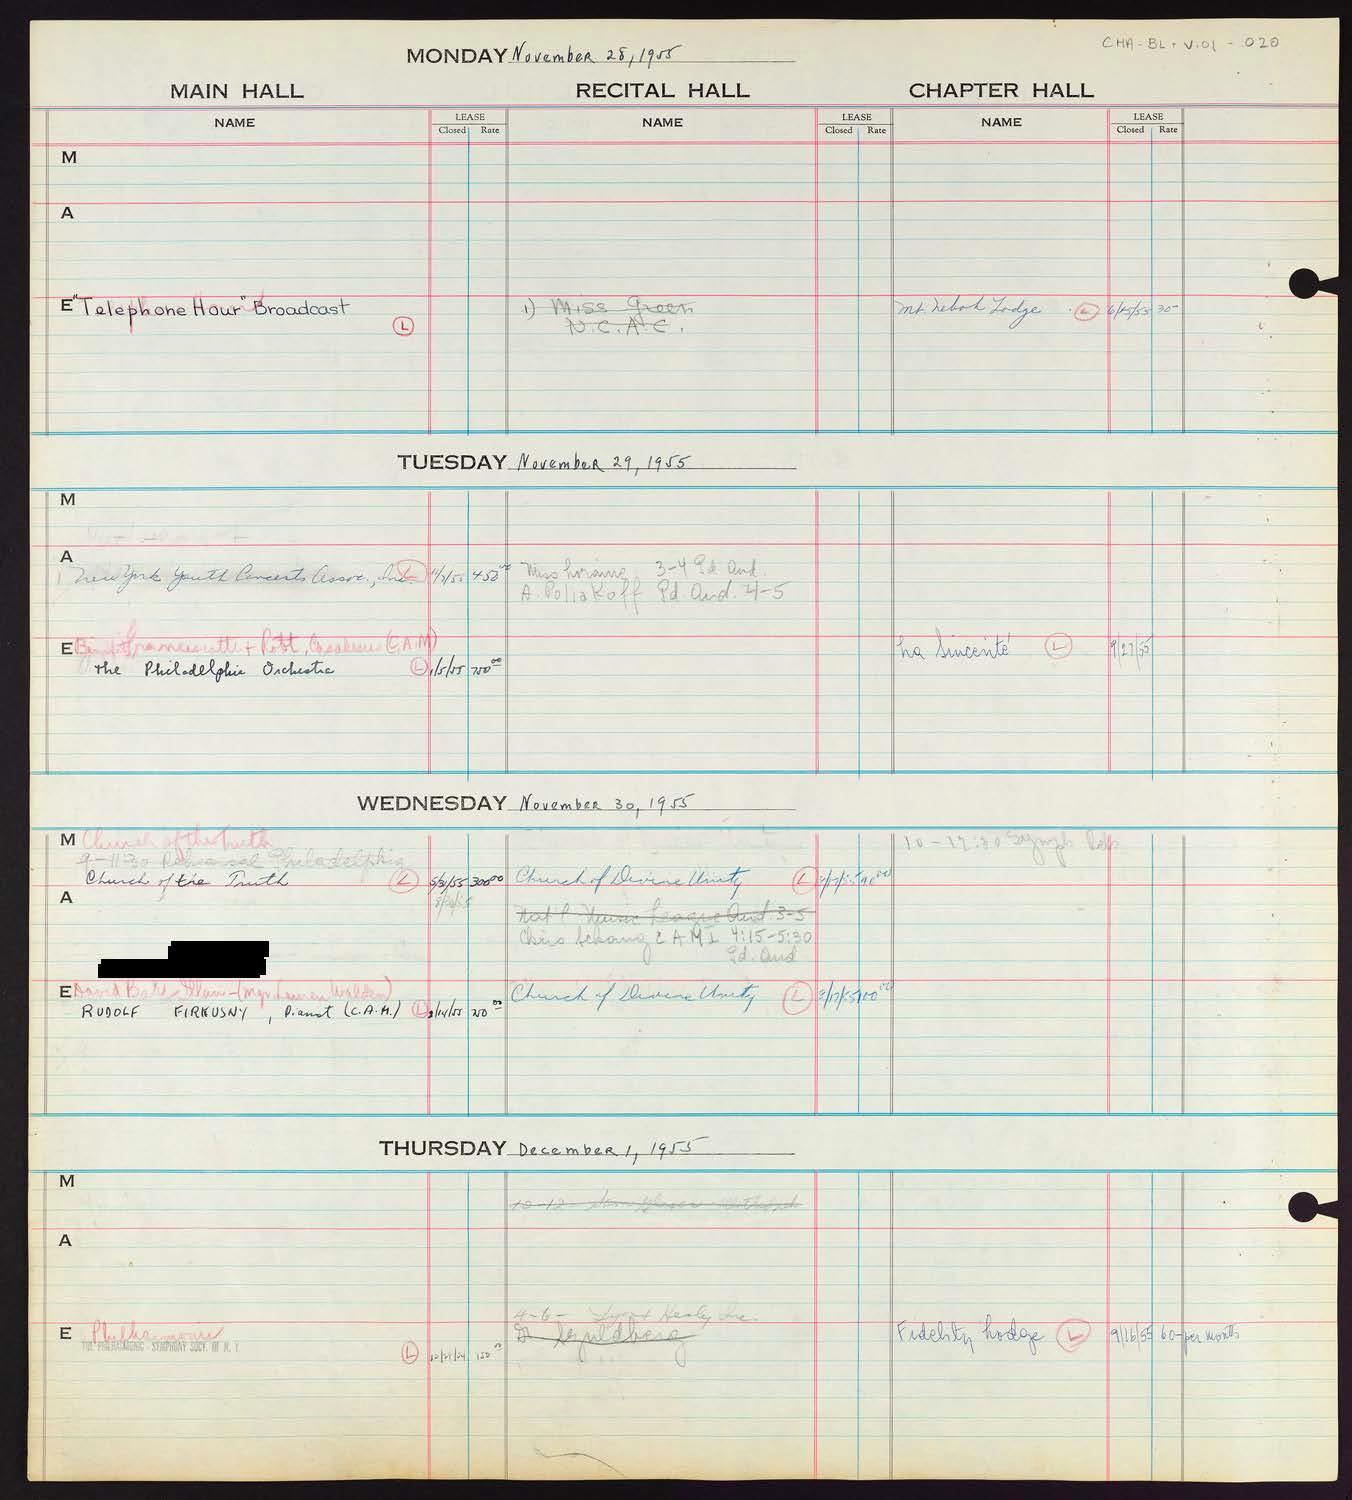 Carnegie Hall Booking Ledger, volume 1, page 20